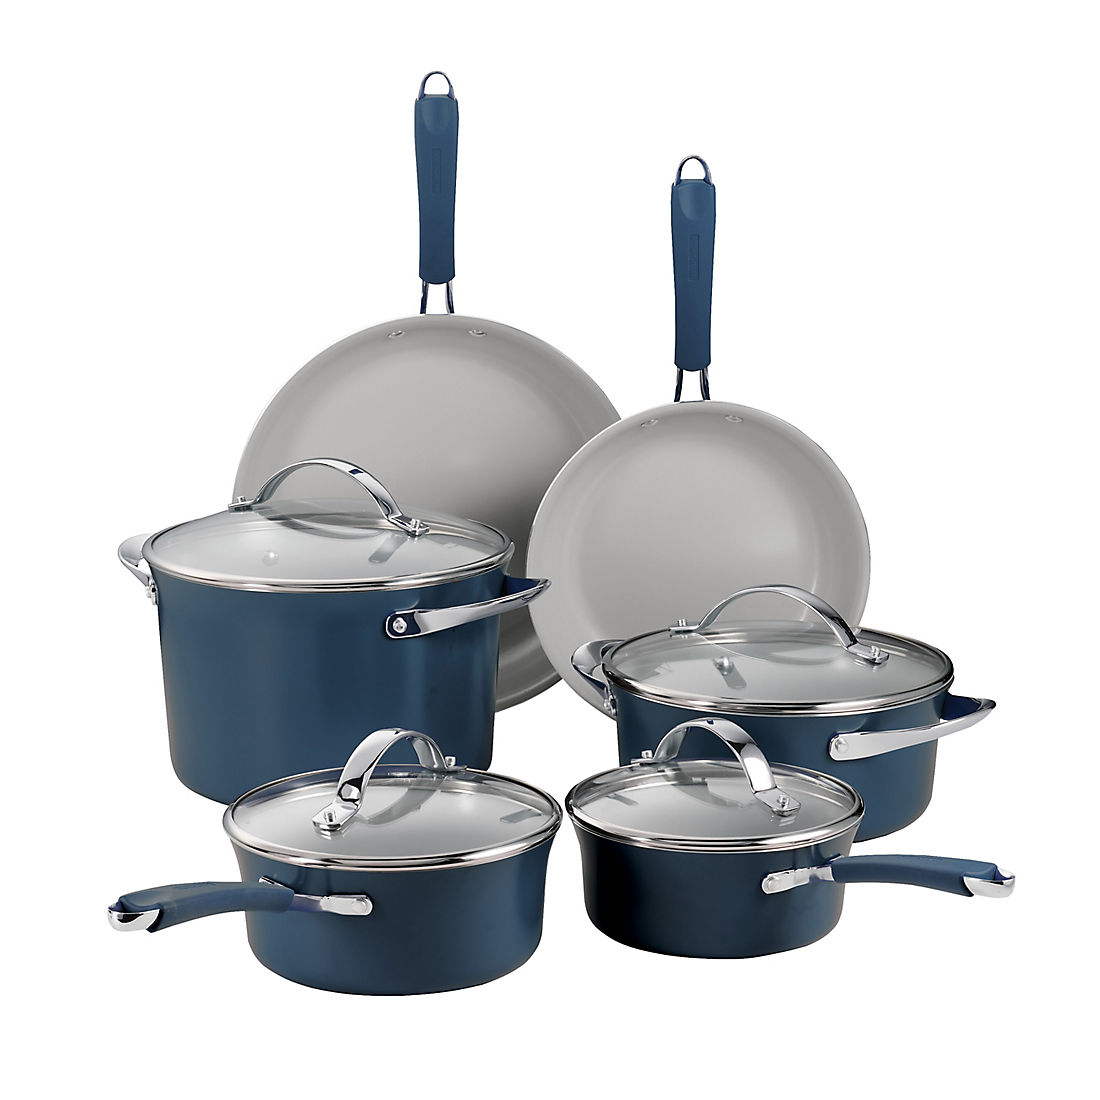 Tramontina Fiora 10-Piece Cold Forged Ceramic Nonstick Cookware